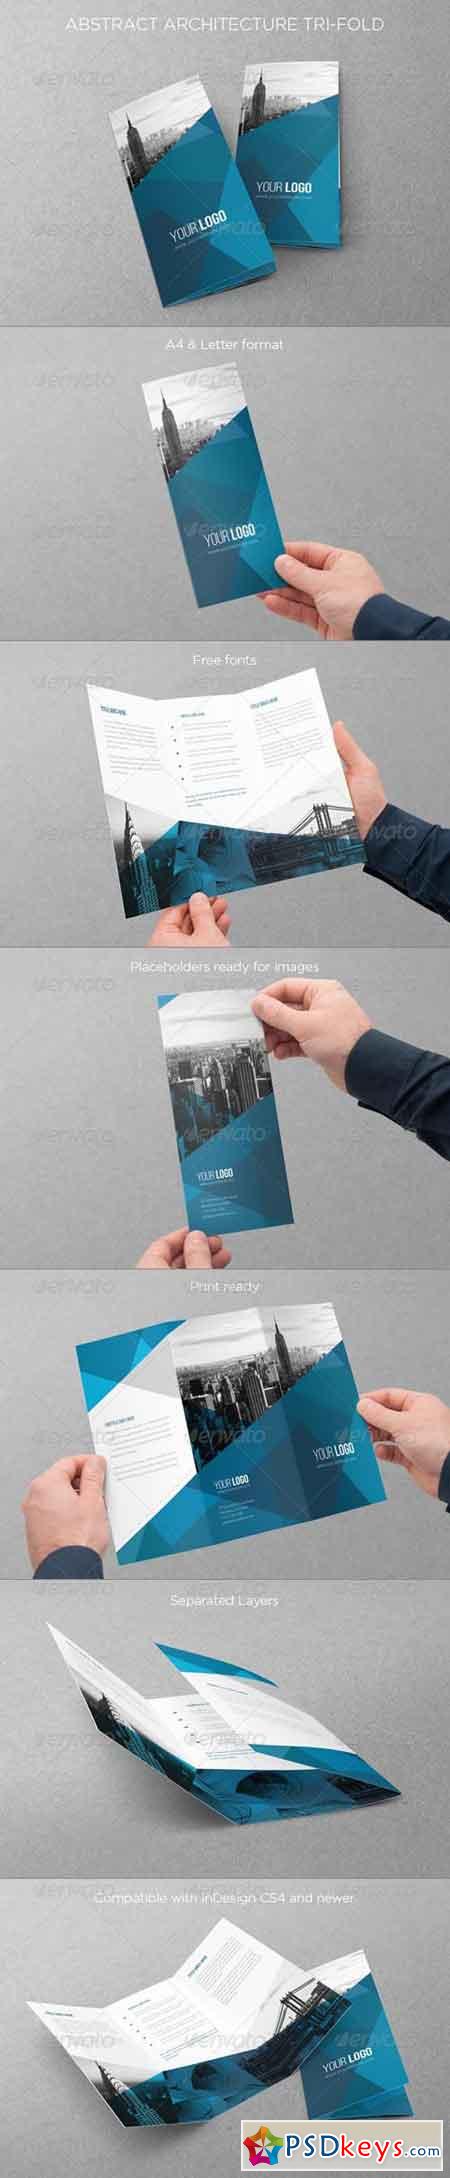 Abstract Architecture Trifold 7230003